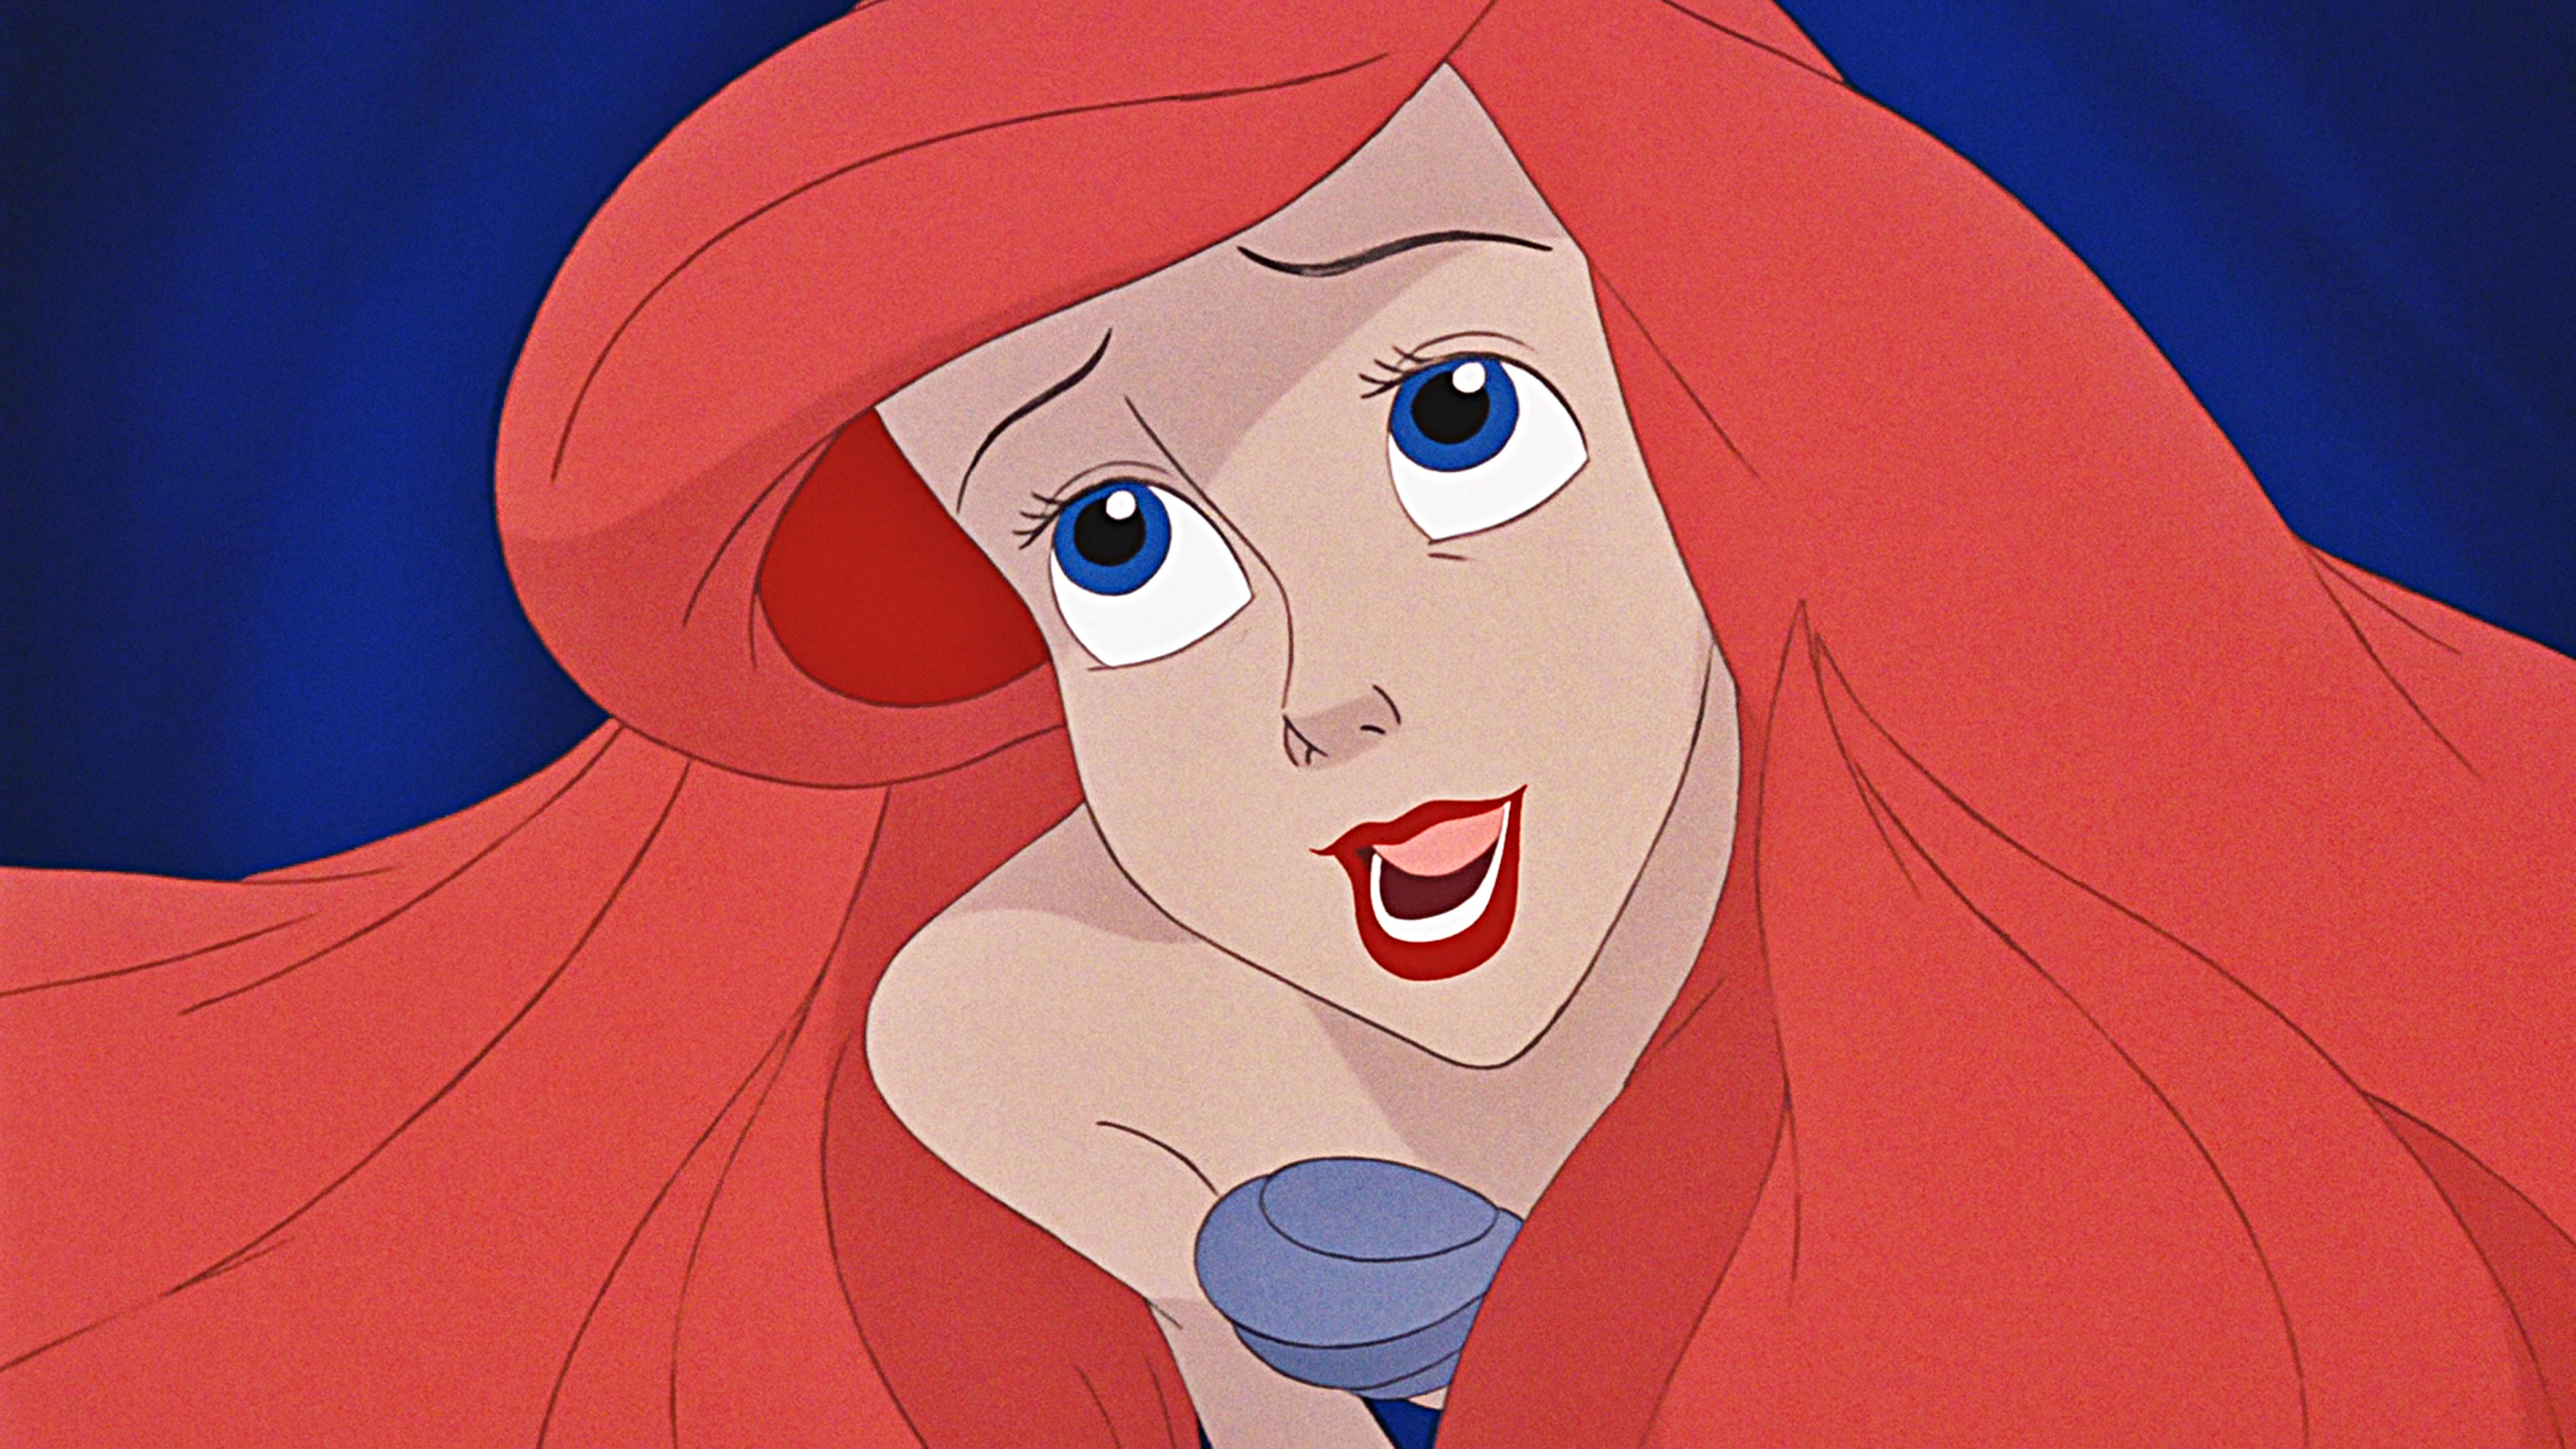 Much of your world. Русалочка Ариэль Дисней. The little Mermaid 1989.